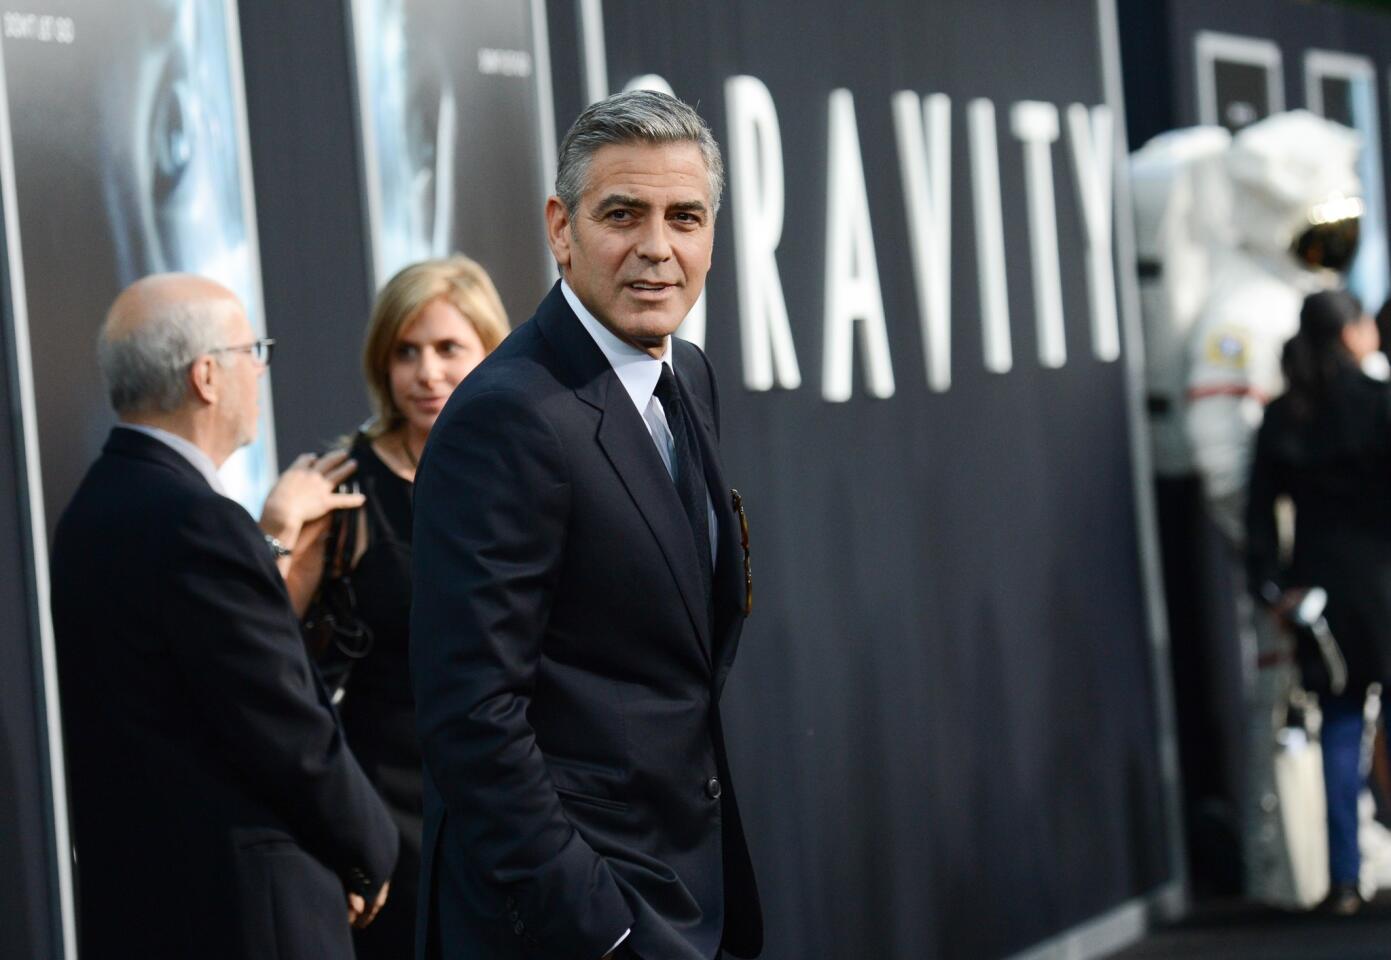 George Clooney wants you to know: He's single